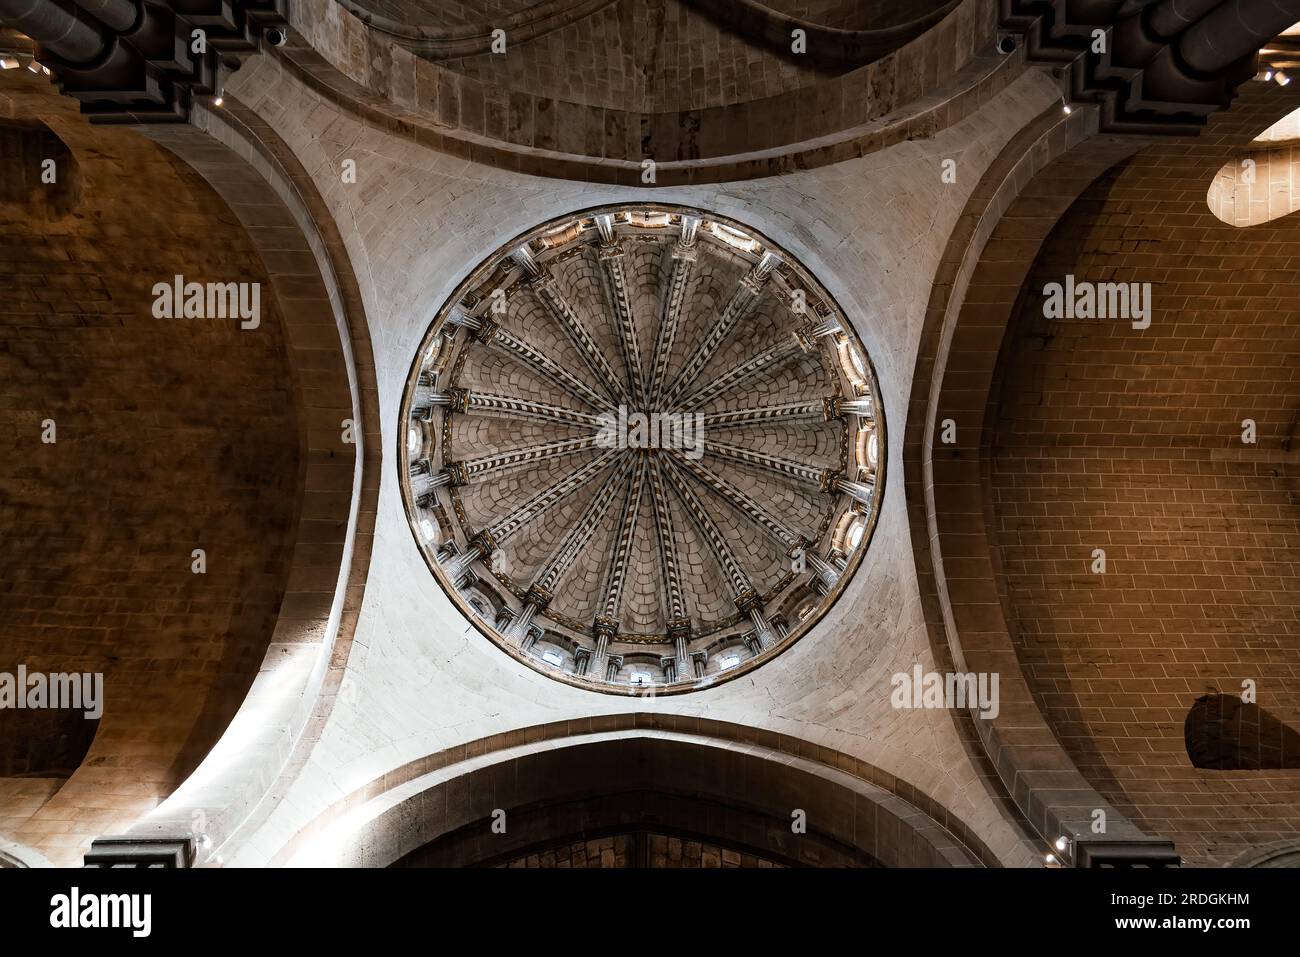 Zamora, Spain - April 7, 2023: Interior view of the dome of the romanesque Cathedral of Zamora. Directly below view Stock Photo